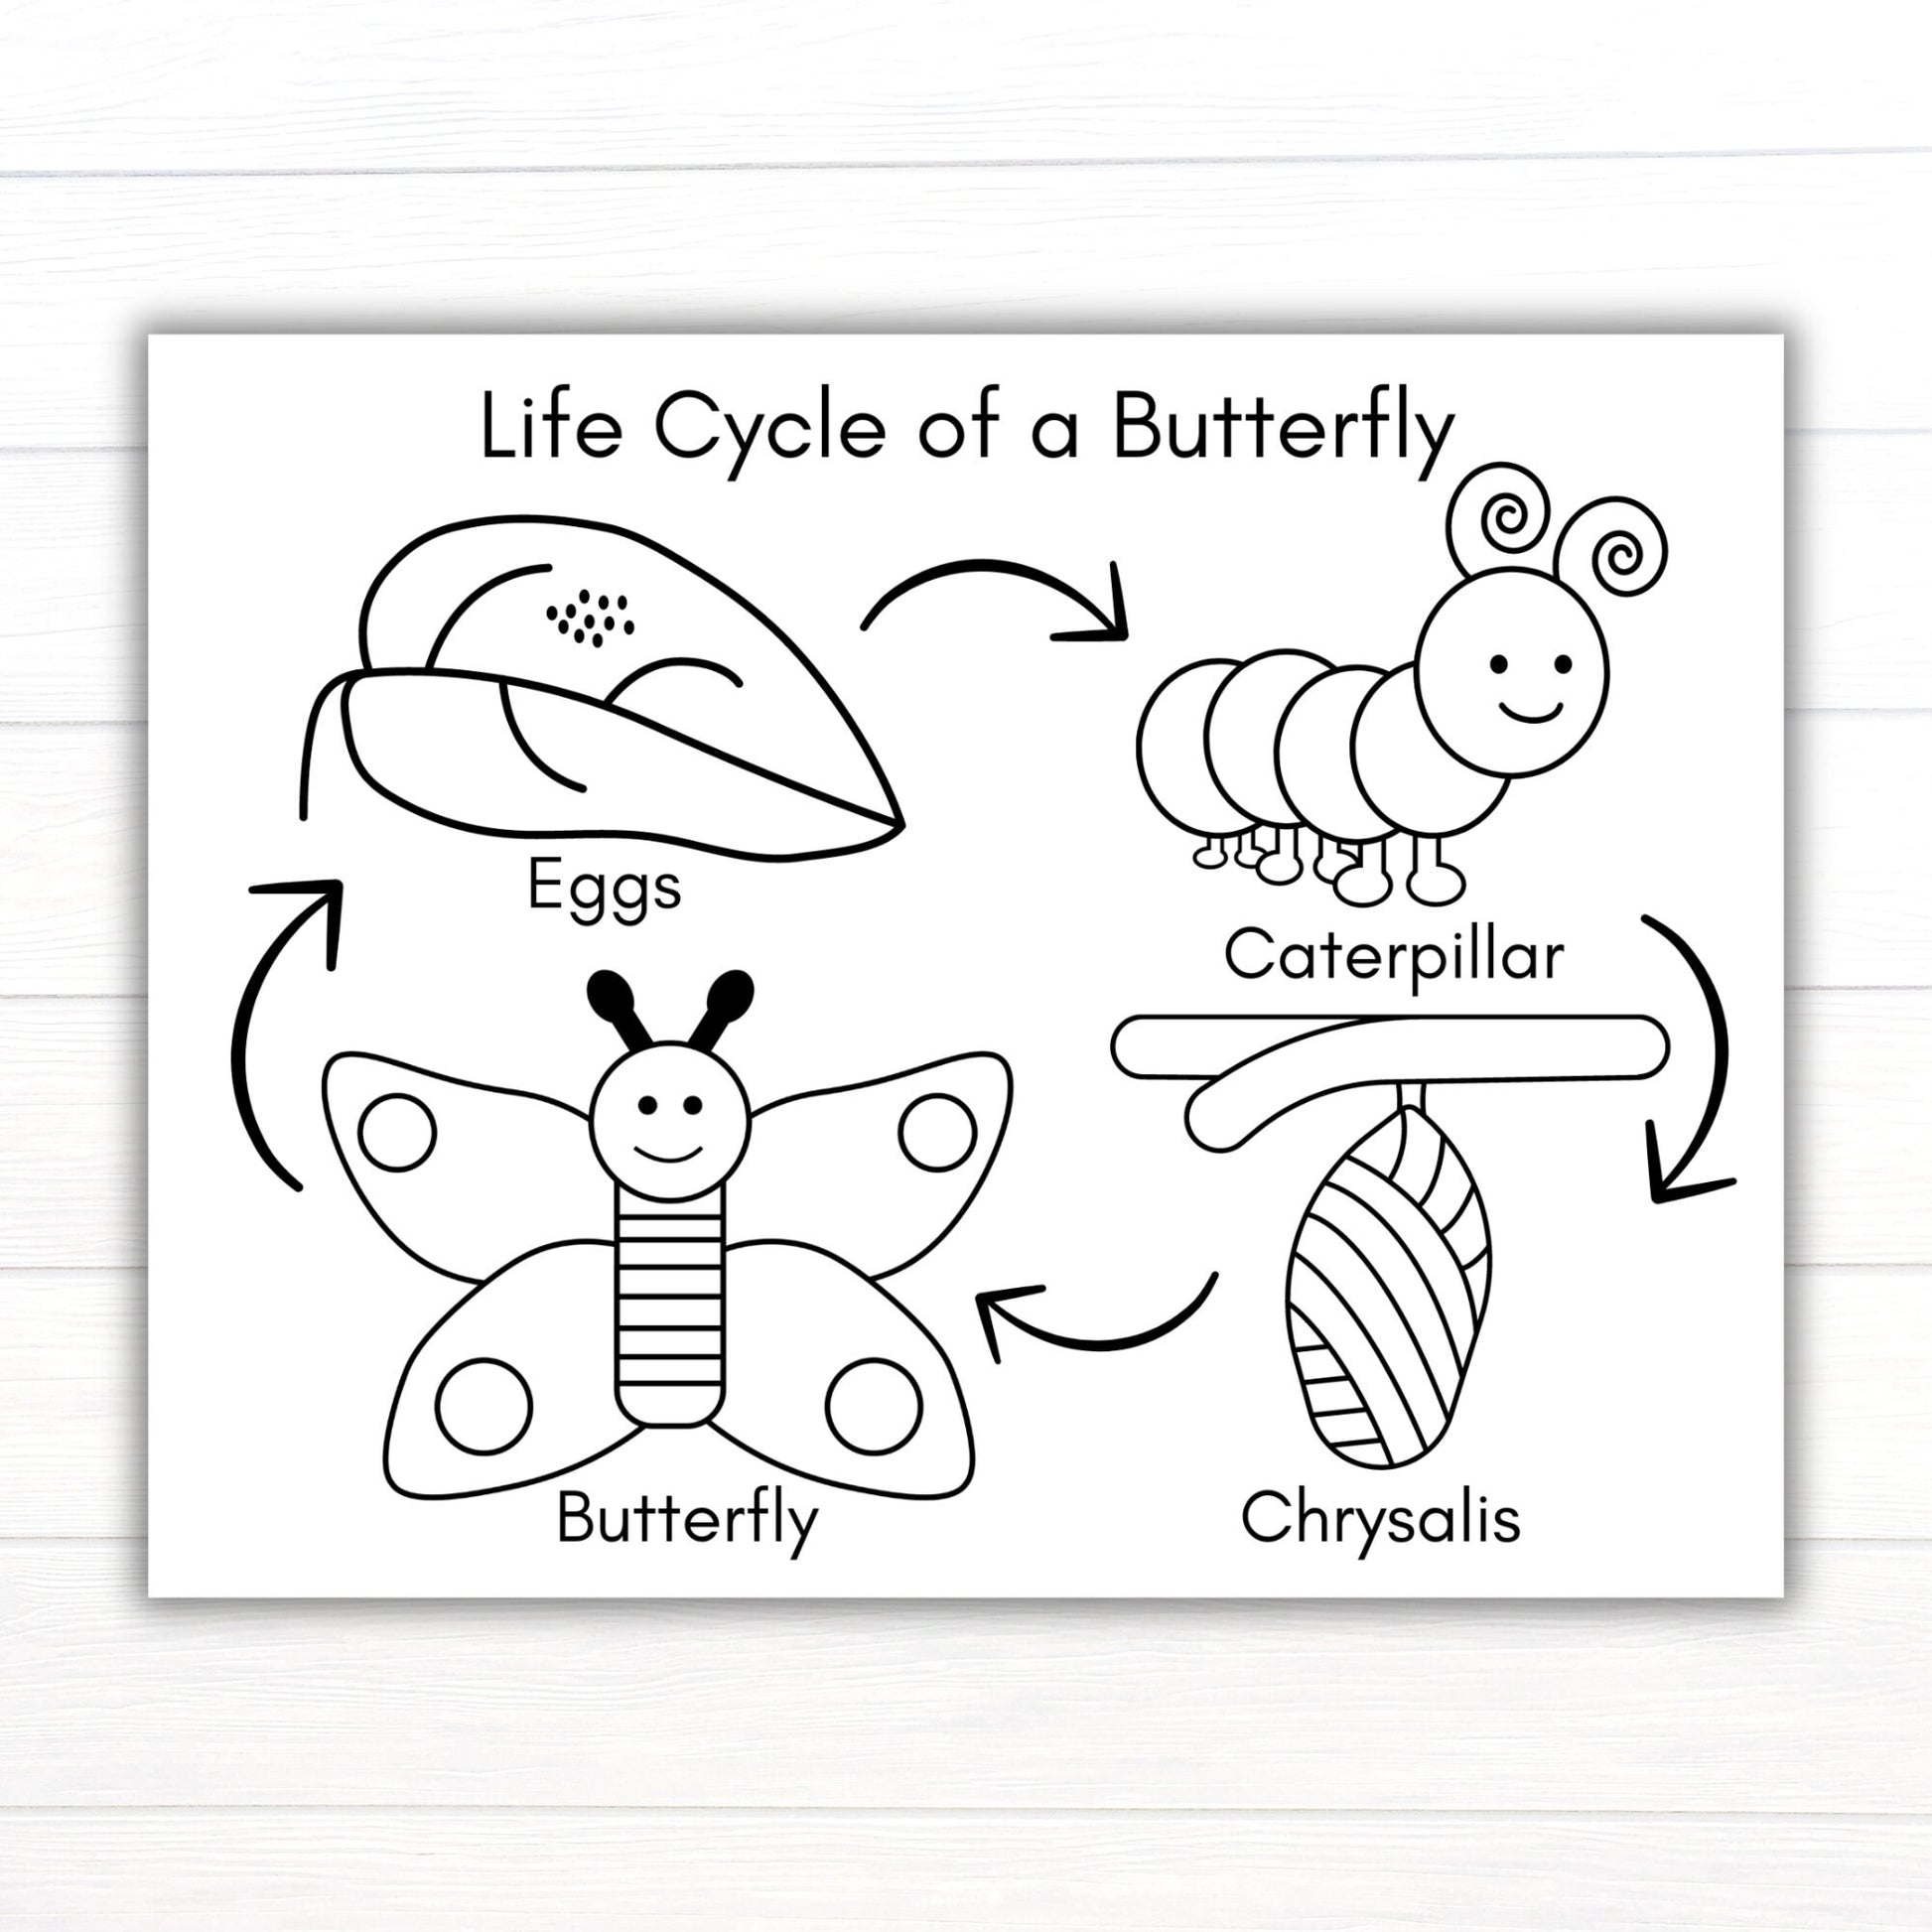 Butterfly Life Cycle Coloring Page, Printable Life Cycle of a Butterfly Activities, Life Cycles, Butterfly Activities, Butterfly Printables